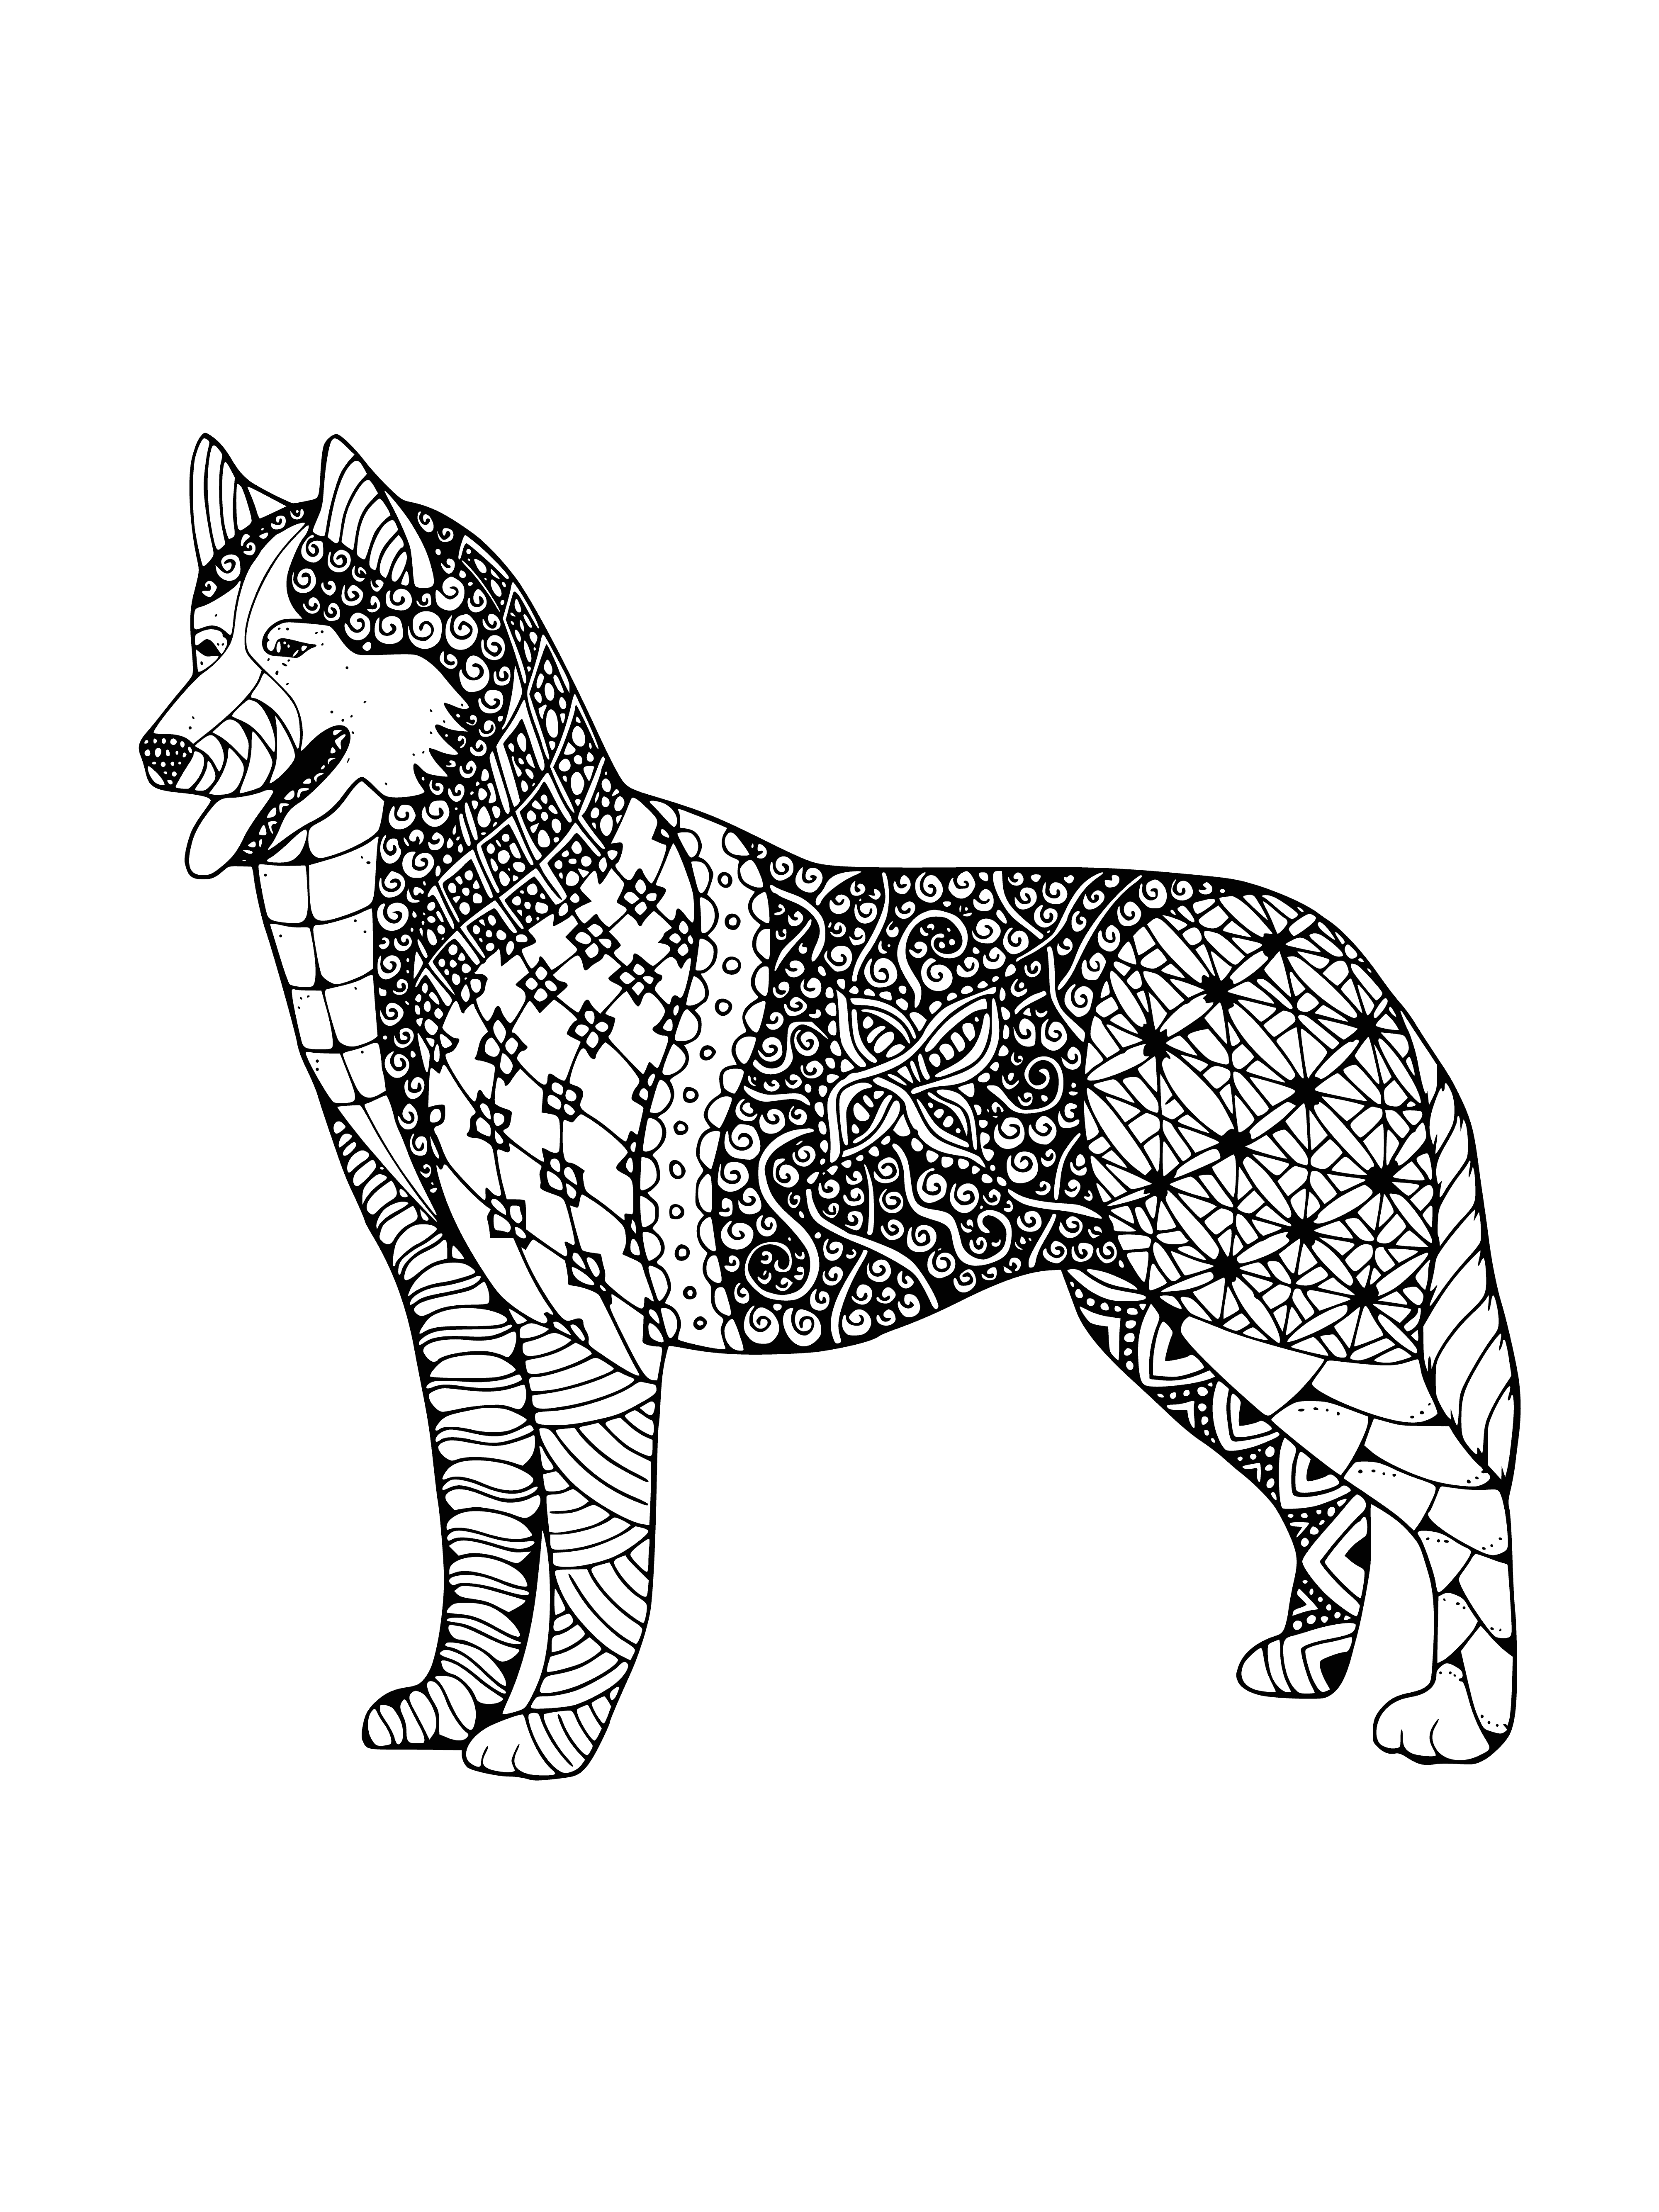 Husky coloring page